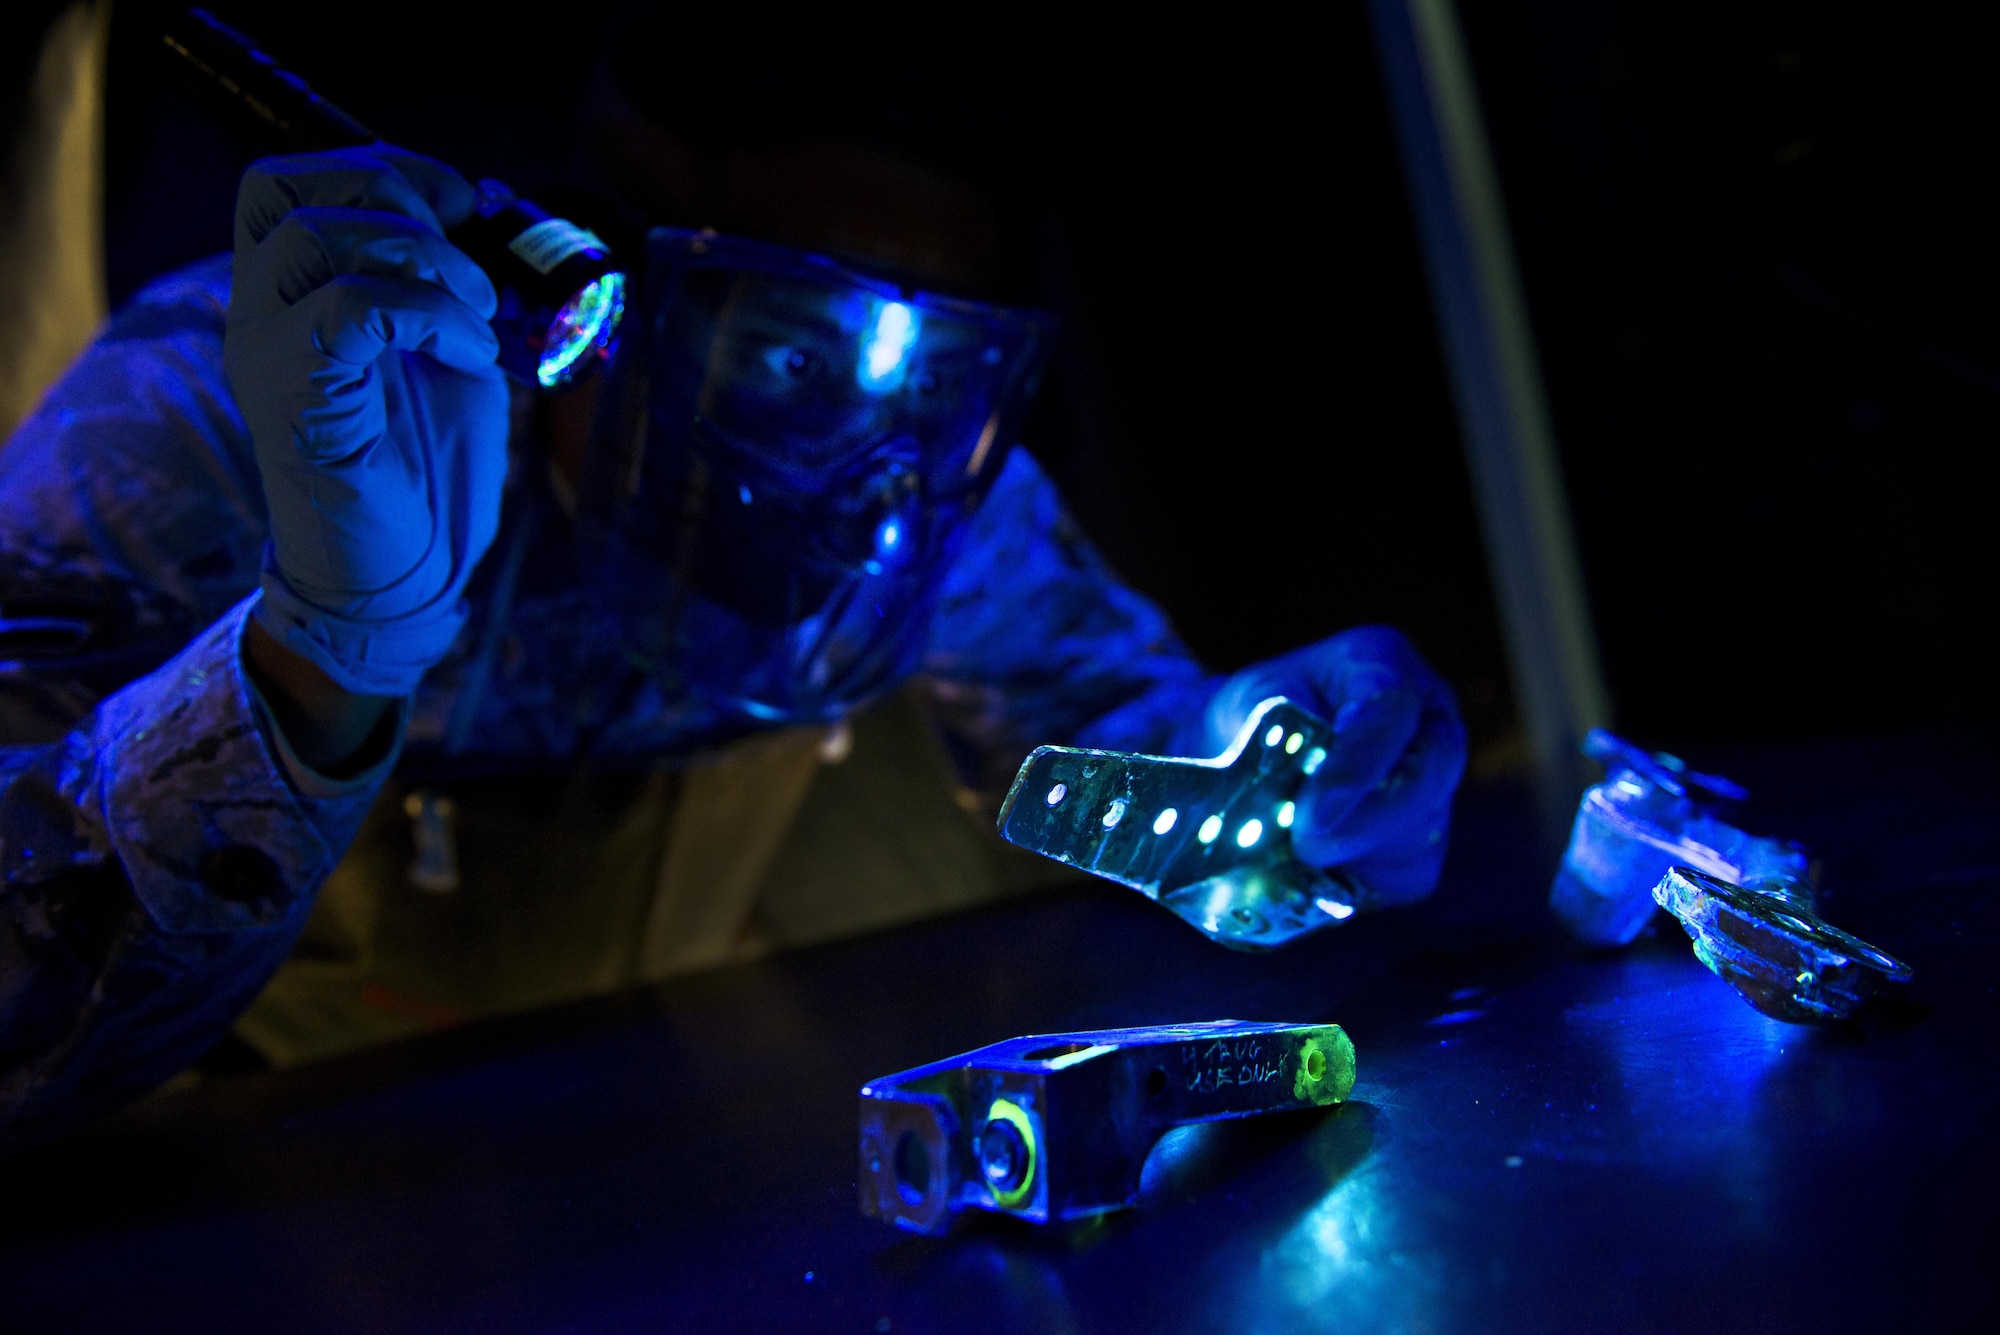 Airman 1st Class Alexander Shaikh, 5th Maintenance Squadron non-destructive inspection journeyman, shines a black light during a fluorescent penetrant inspection at Minot Air Force Base, N.D., Oct. 18, 2016. The black light aids Shaikh in locating cracks and imperfections on parts of the B-52H Stratofortress and aircraft support equipment. (U.S. Air Force photo/Airman 1st Class J.T. Armstrong)